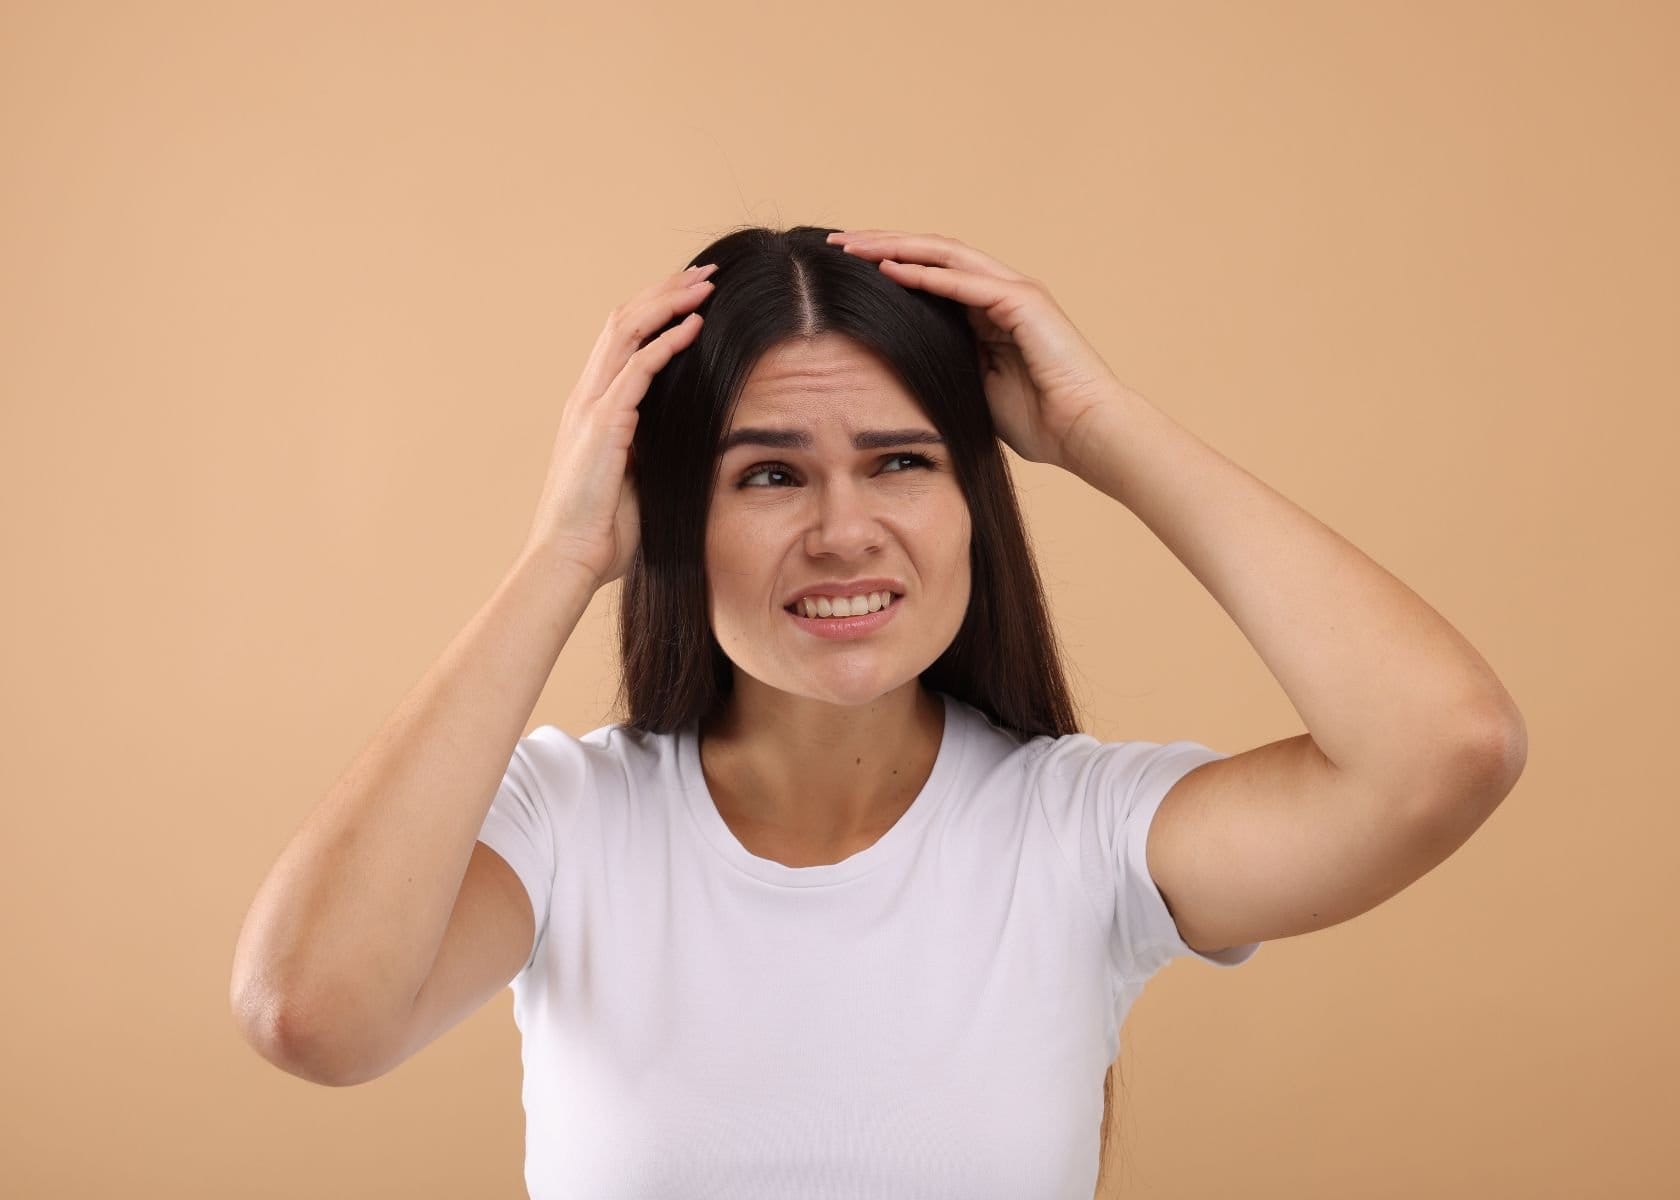 Causes of Itchiness Under a Wig